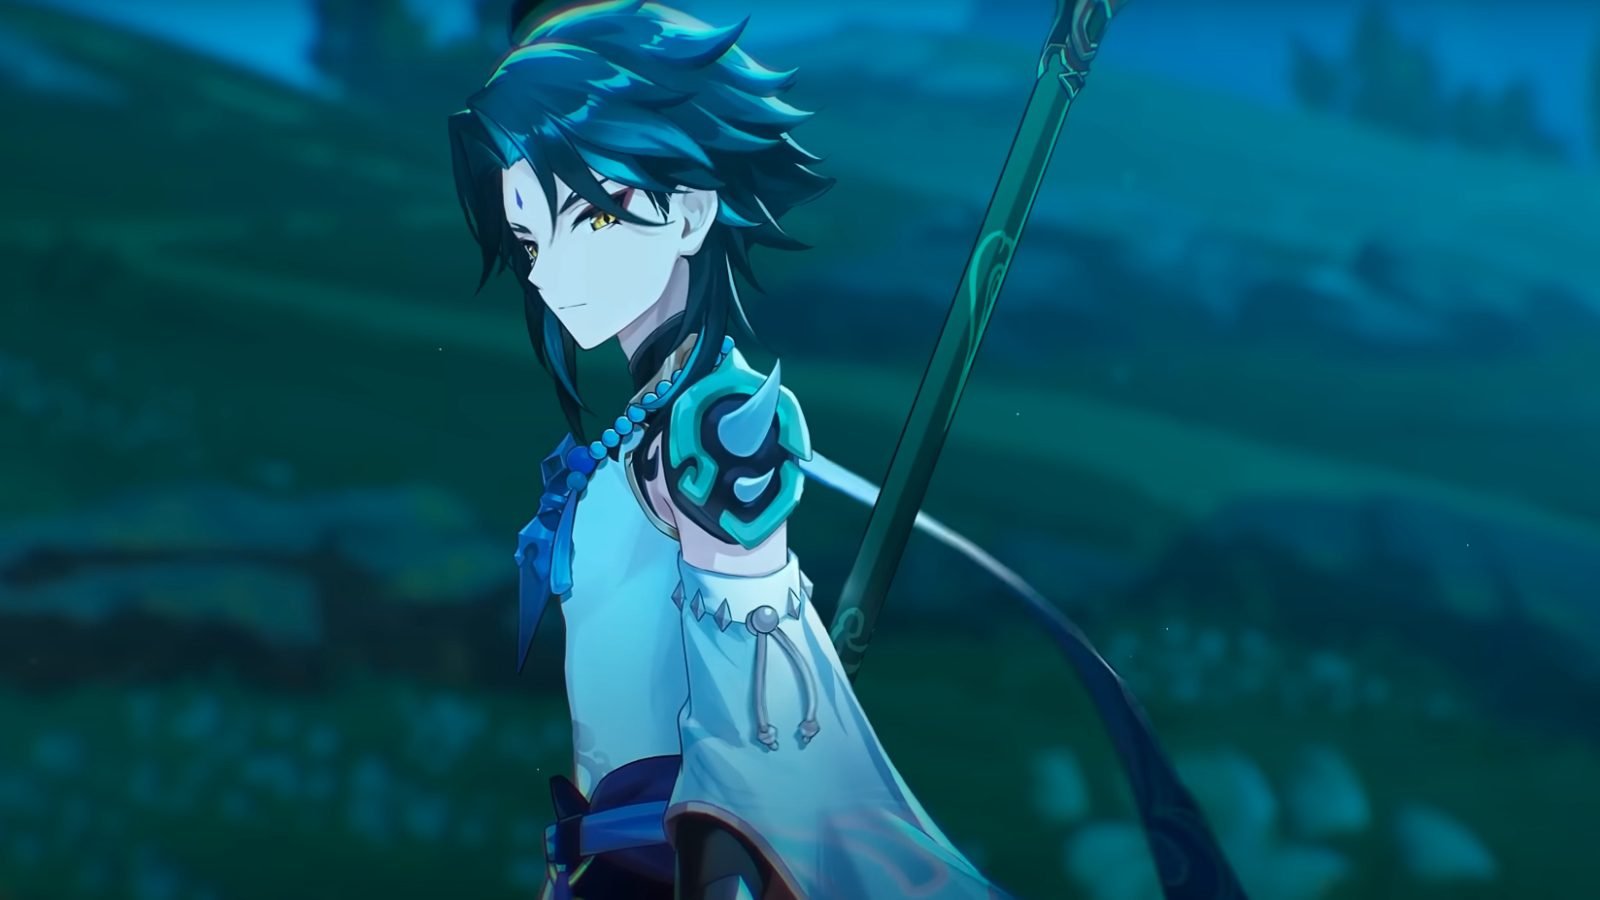 Genshin Impact Anime trailer shows Aether and Lumine together